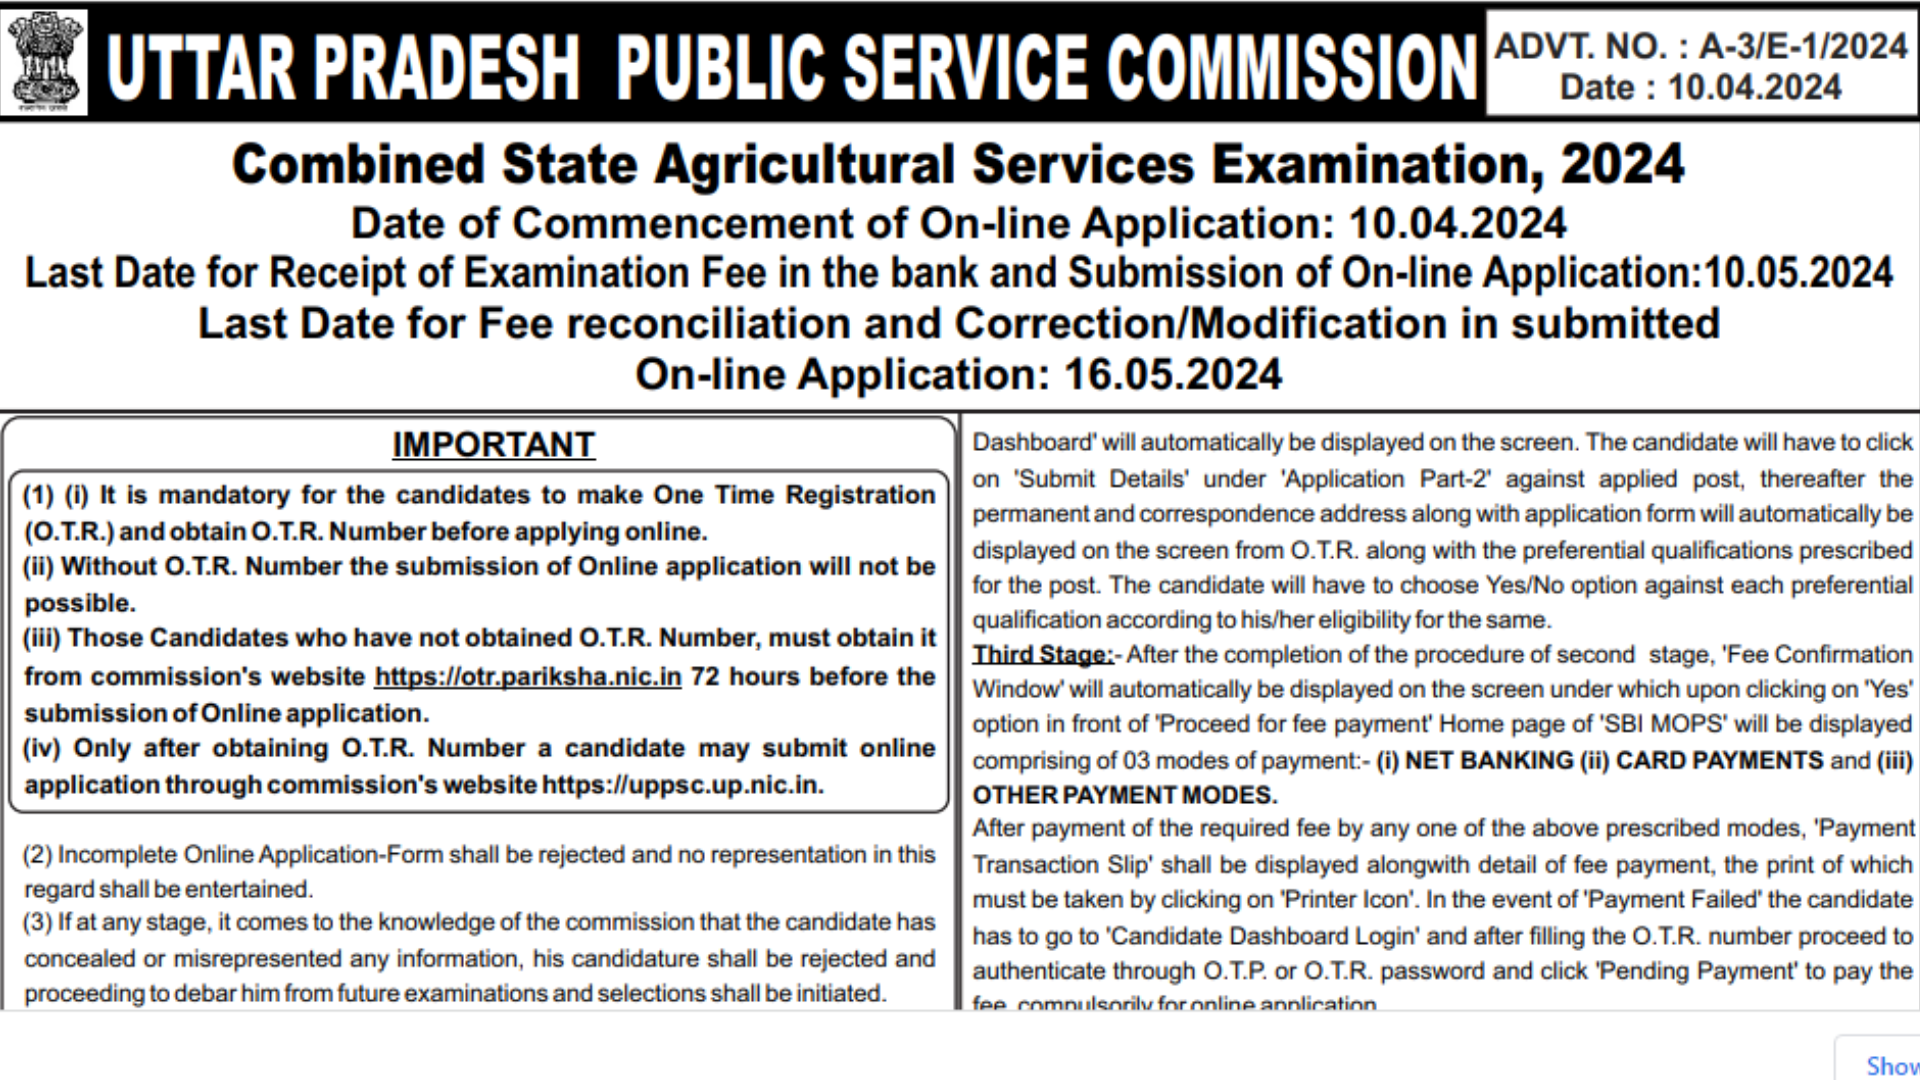 UPPSC Combined State Agriculture Services Recruitment 2024 Apply Online for 268 Post